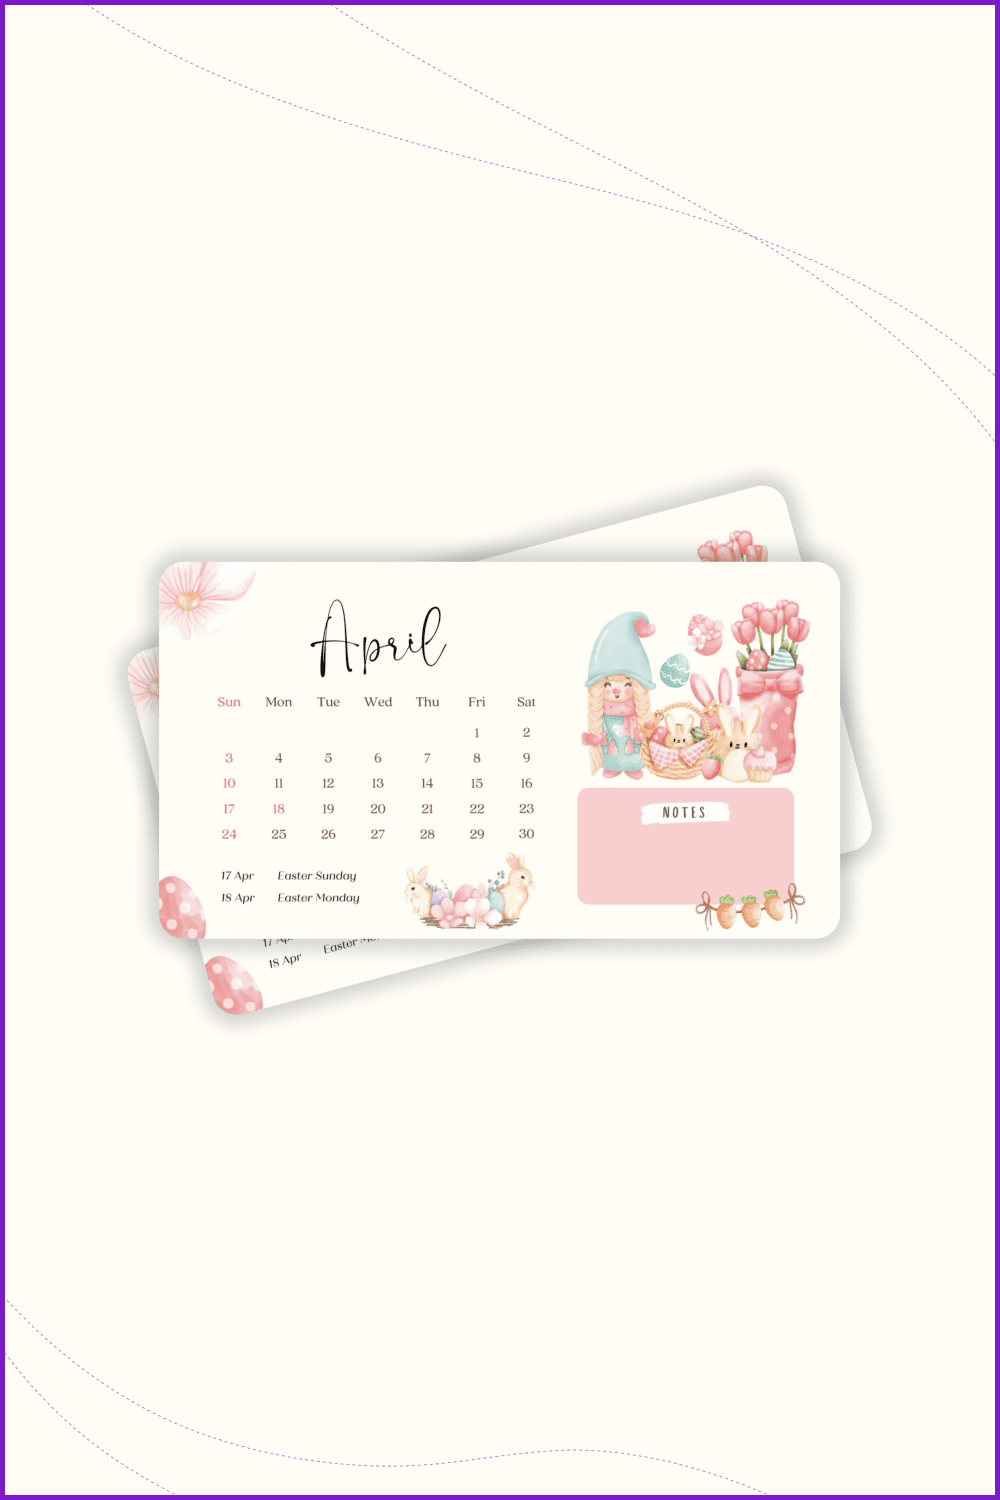 Cute calendar with drawing girl and bunnies.